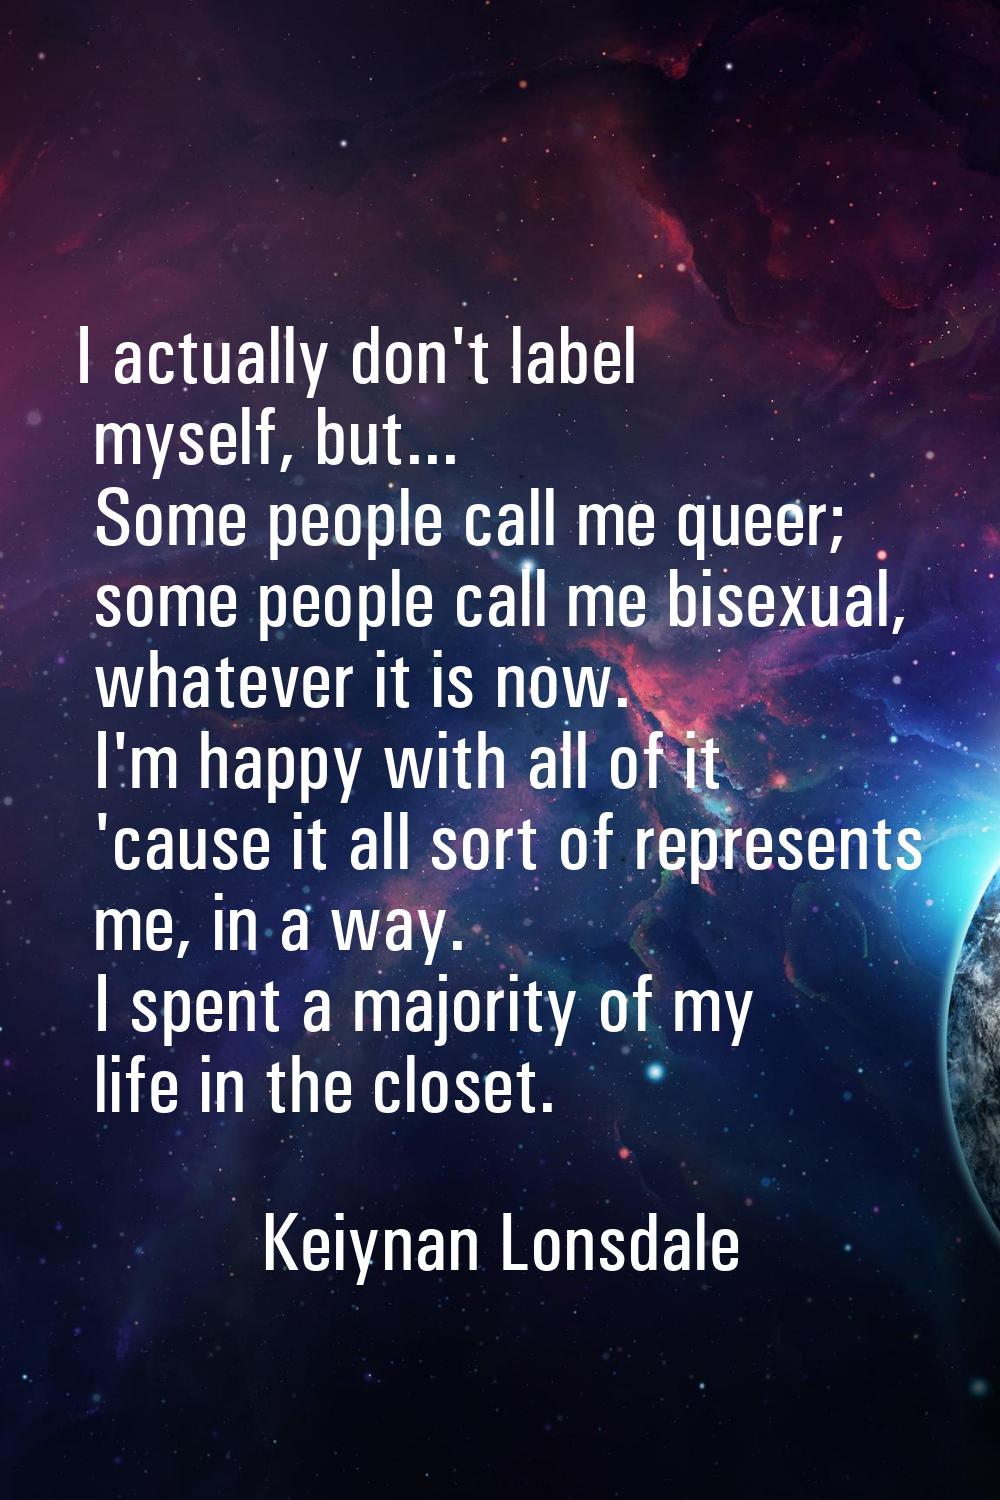 I actually don't label myself, but... Some people call me queer; some people call me bisexual, what